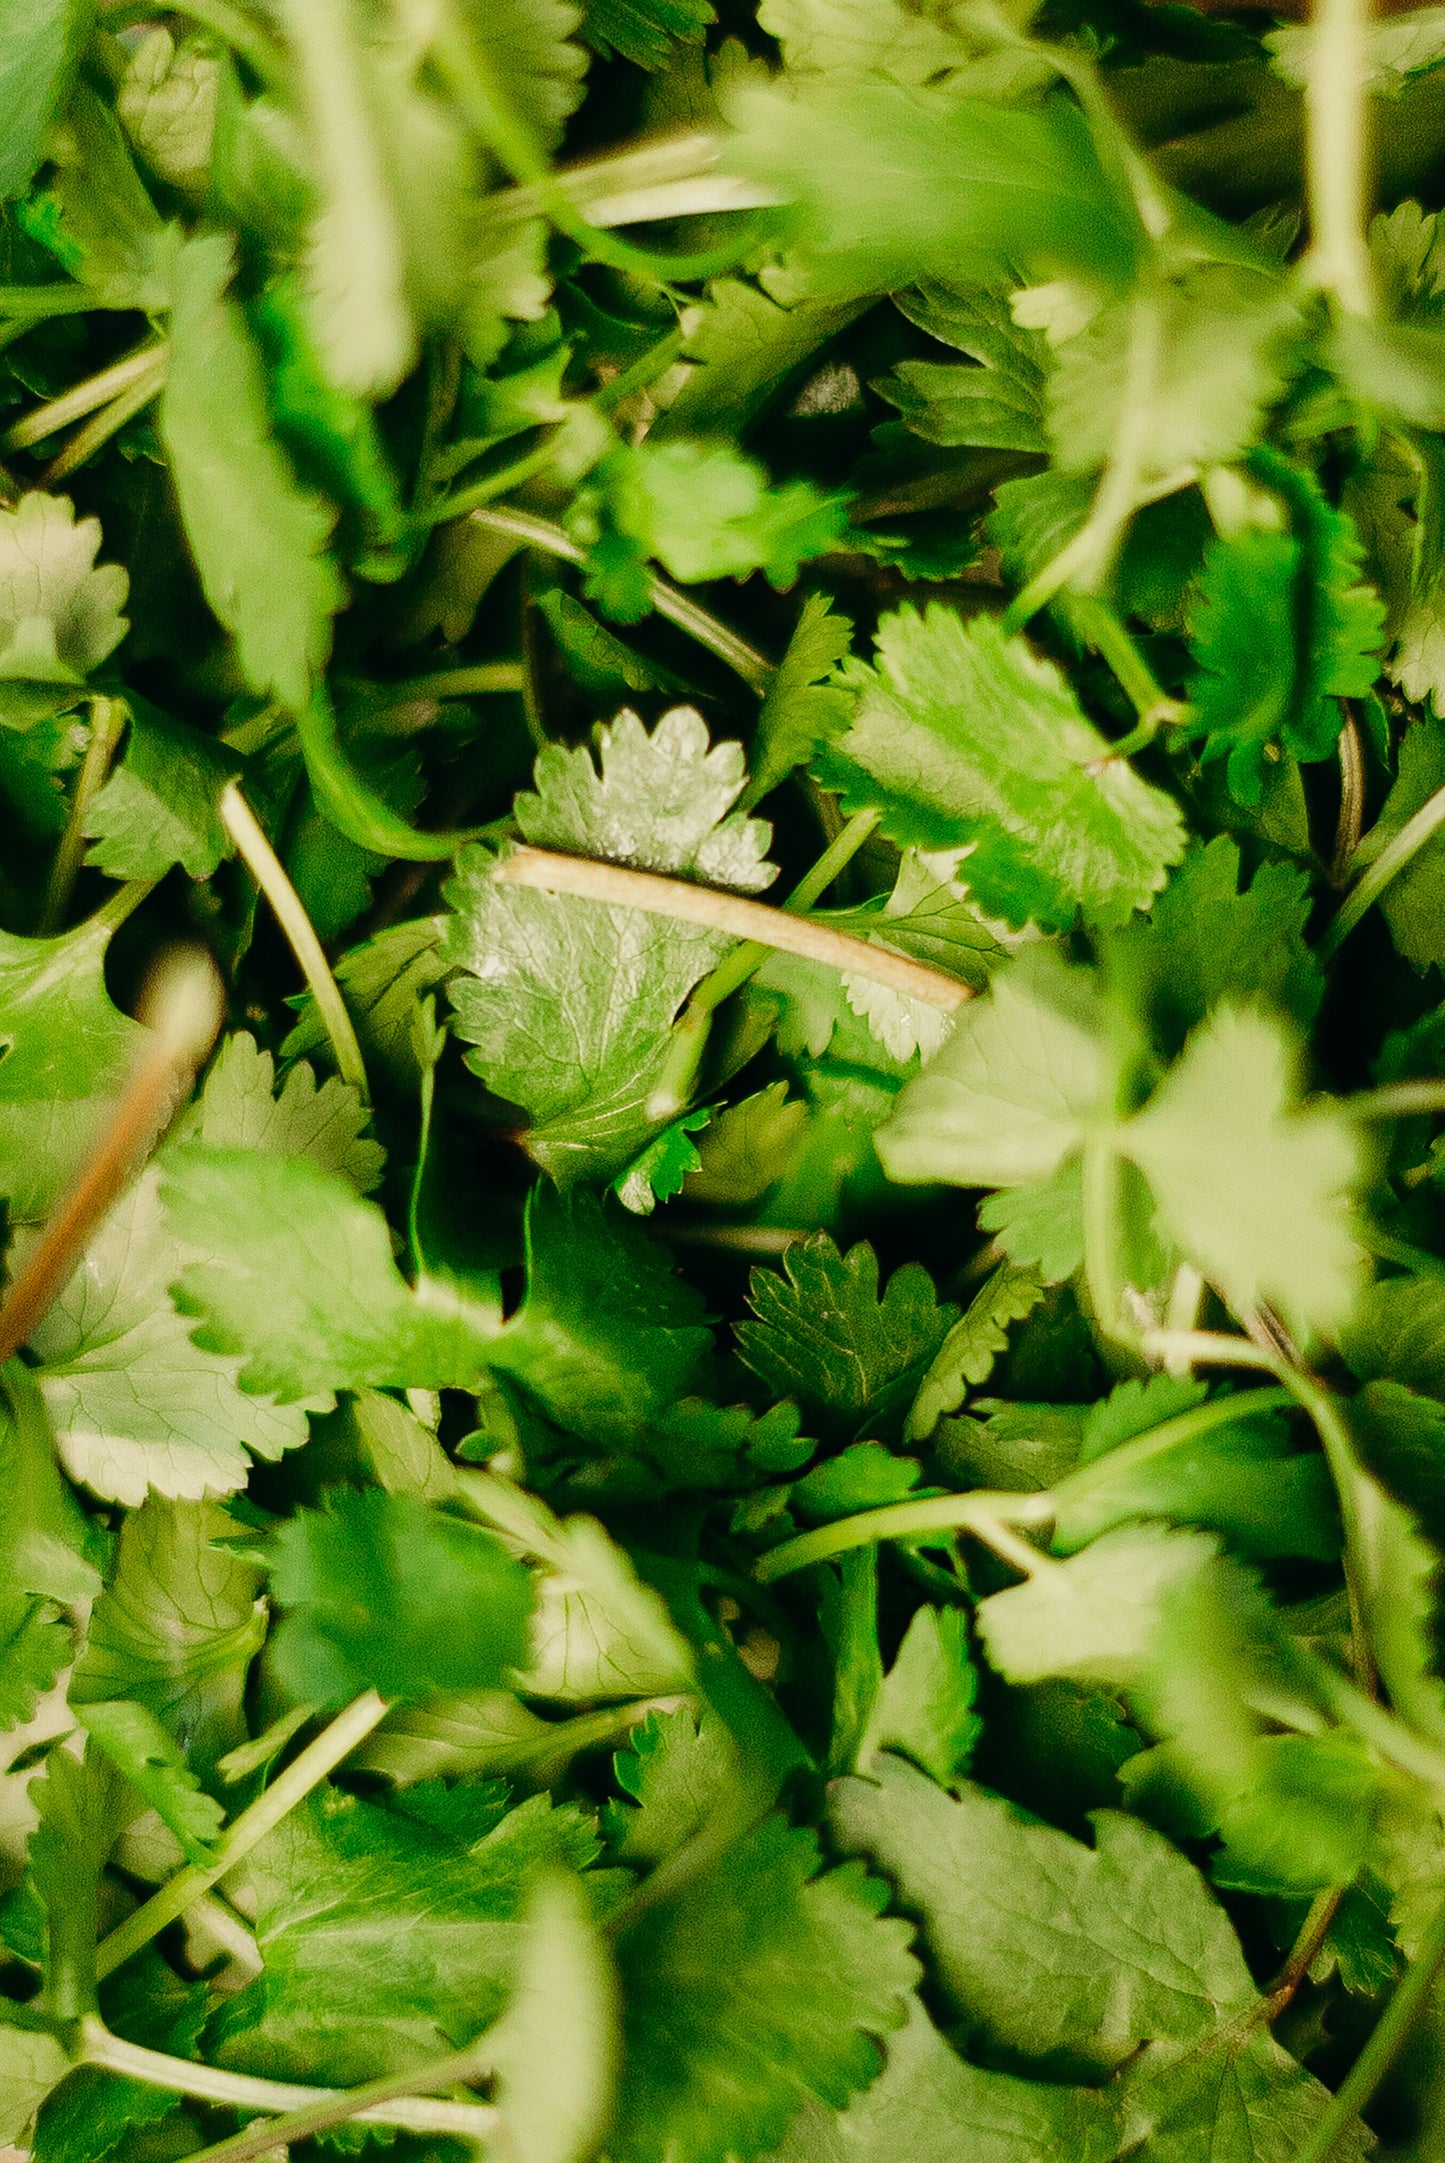 Health Benefits of Cilantro: Why Use It for Cleansing